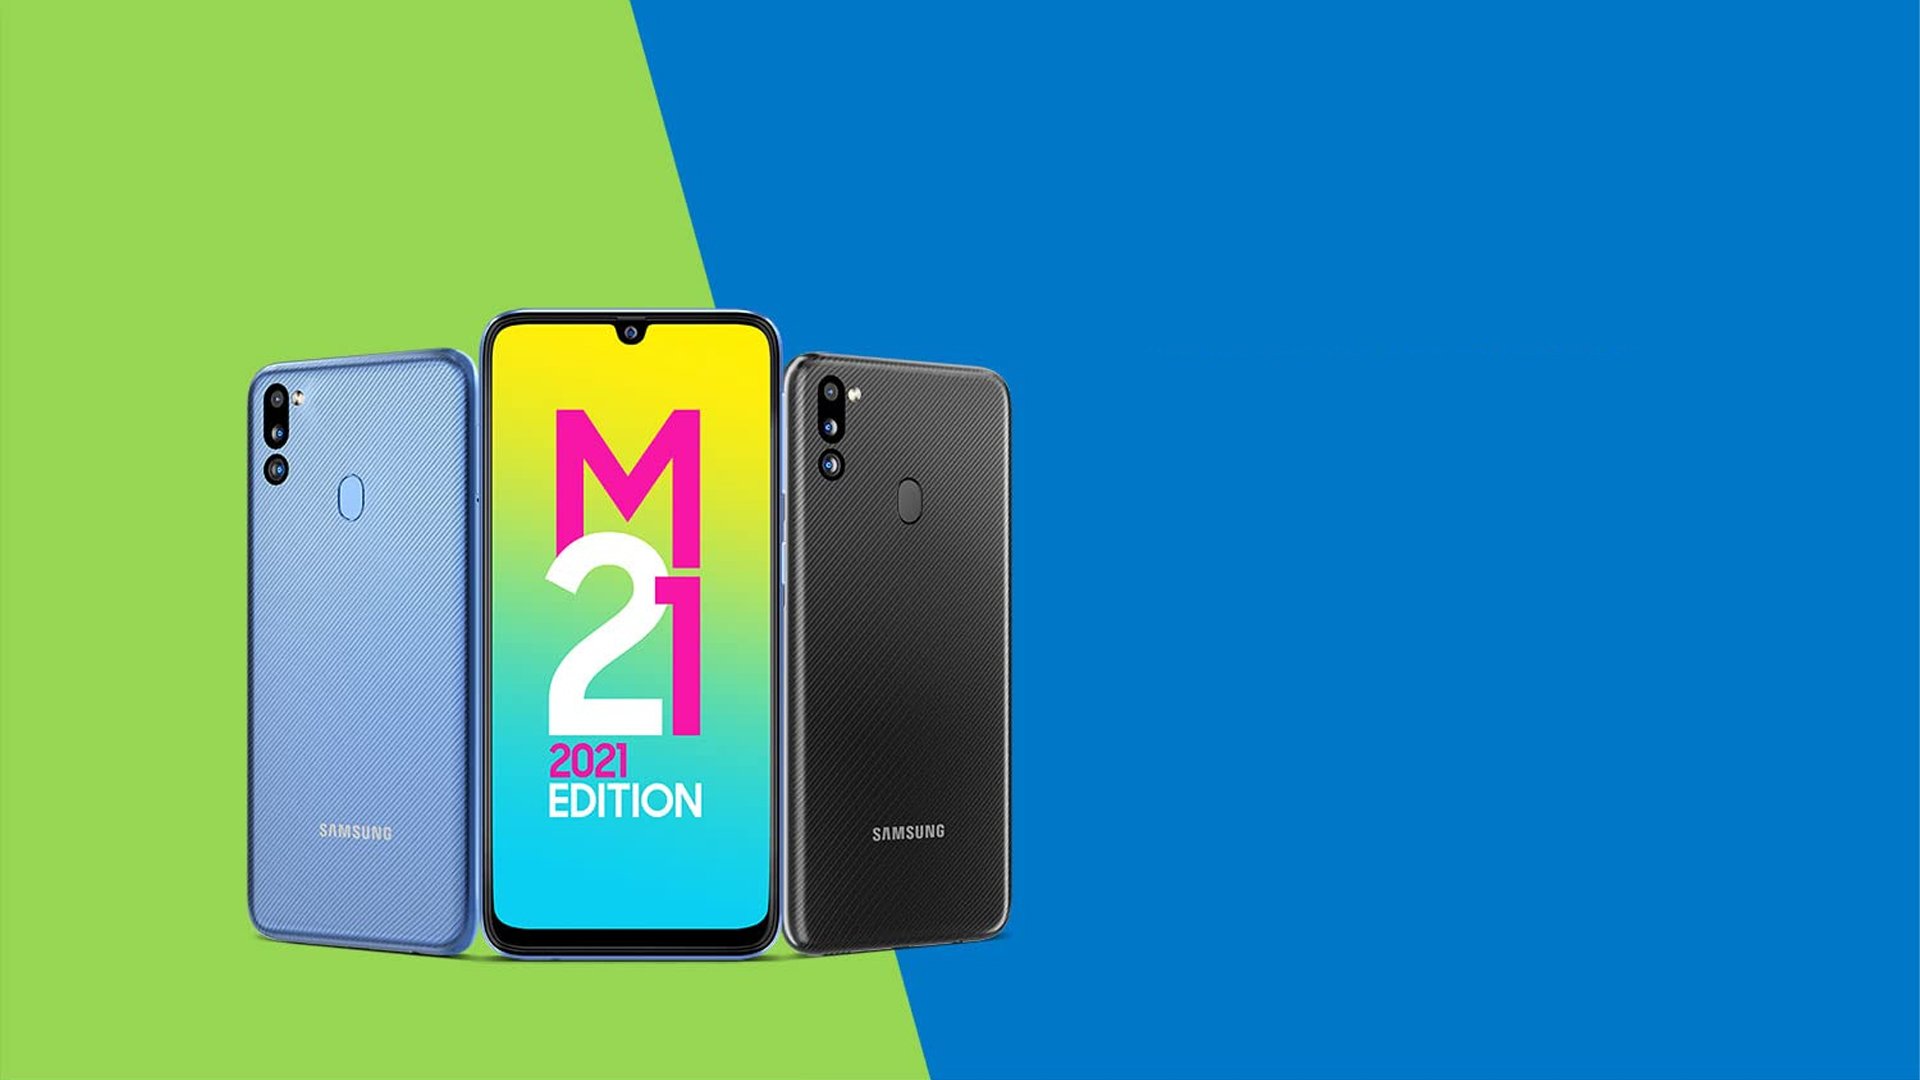 Samsung refreshes the Galaxy M21 for 2021, launches with bigger 48MP camera